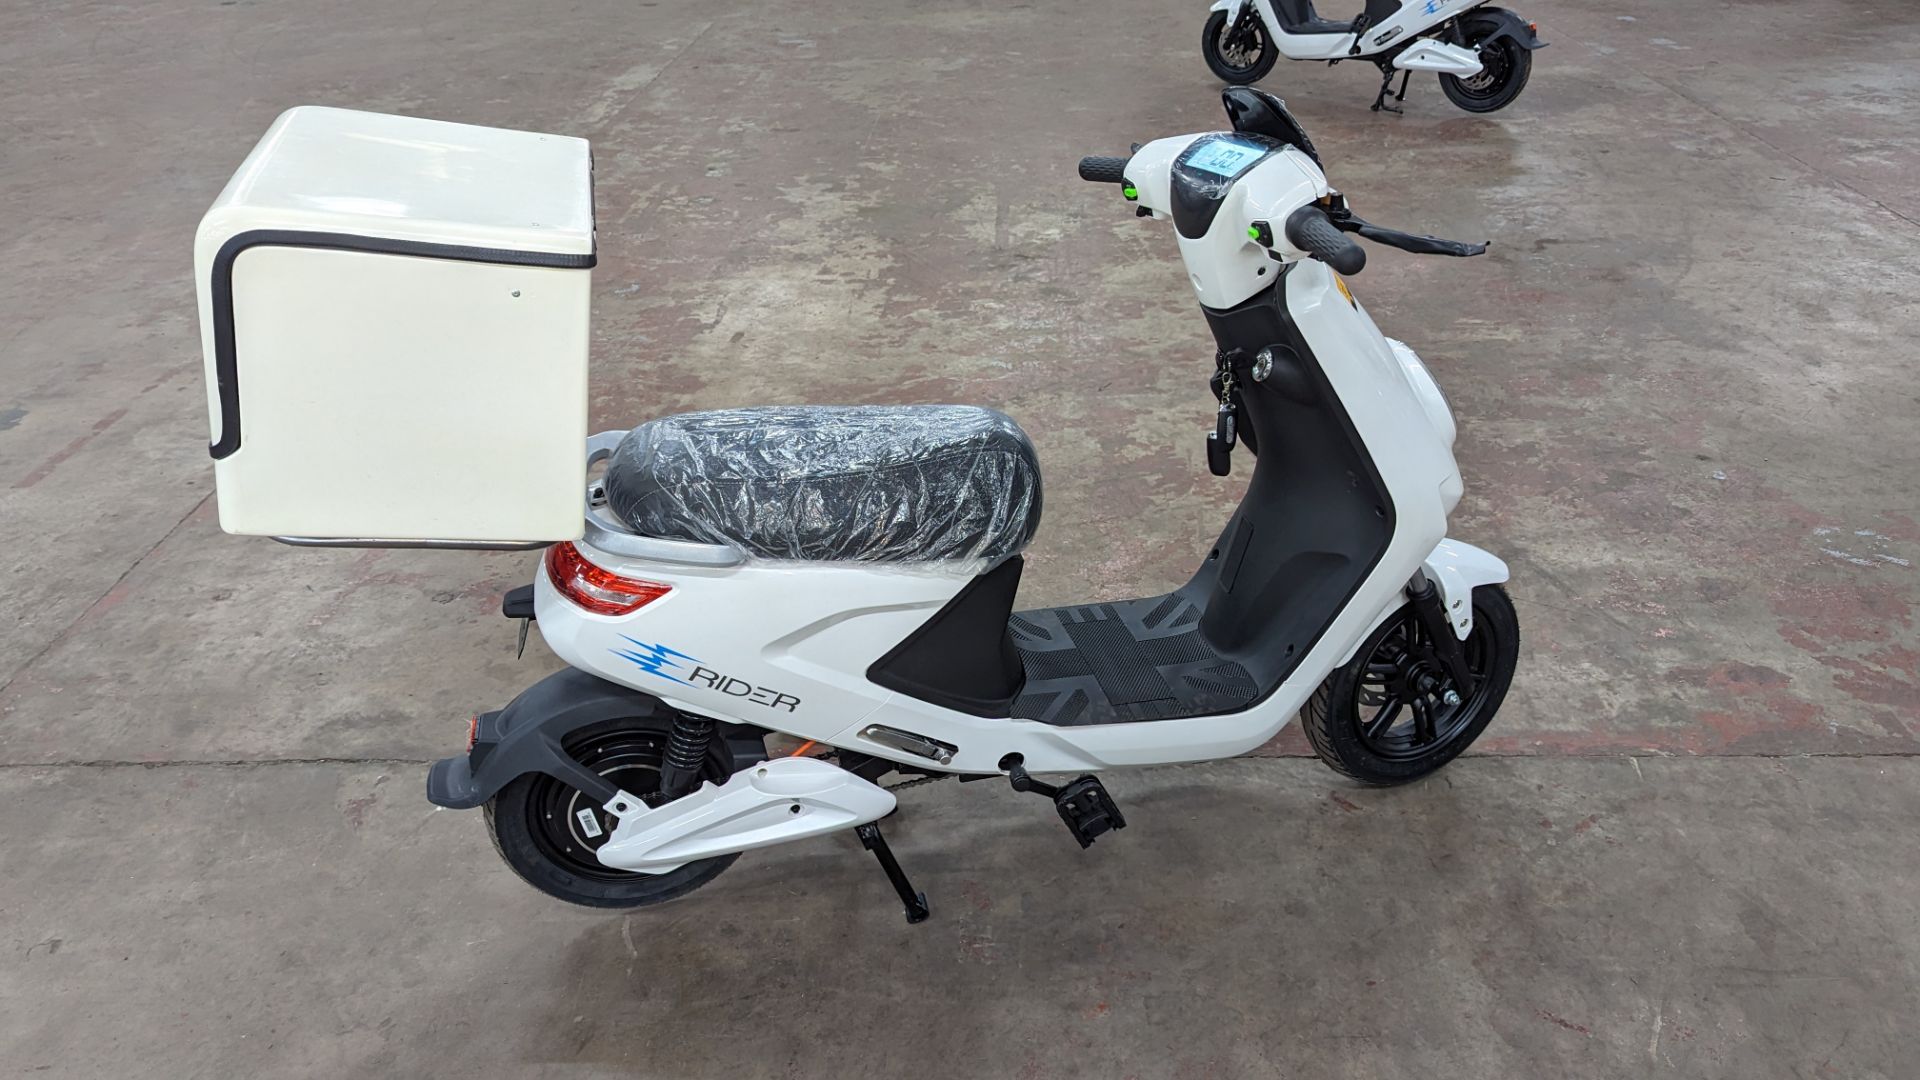 Model 18 Electric Bike: Zero (0) recorded miles, white body with black detailing, insulated box moun - Image 6 of 14